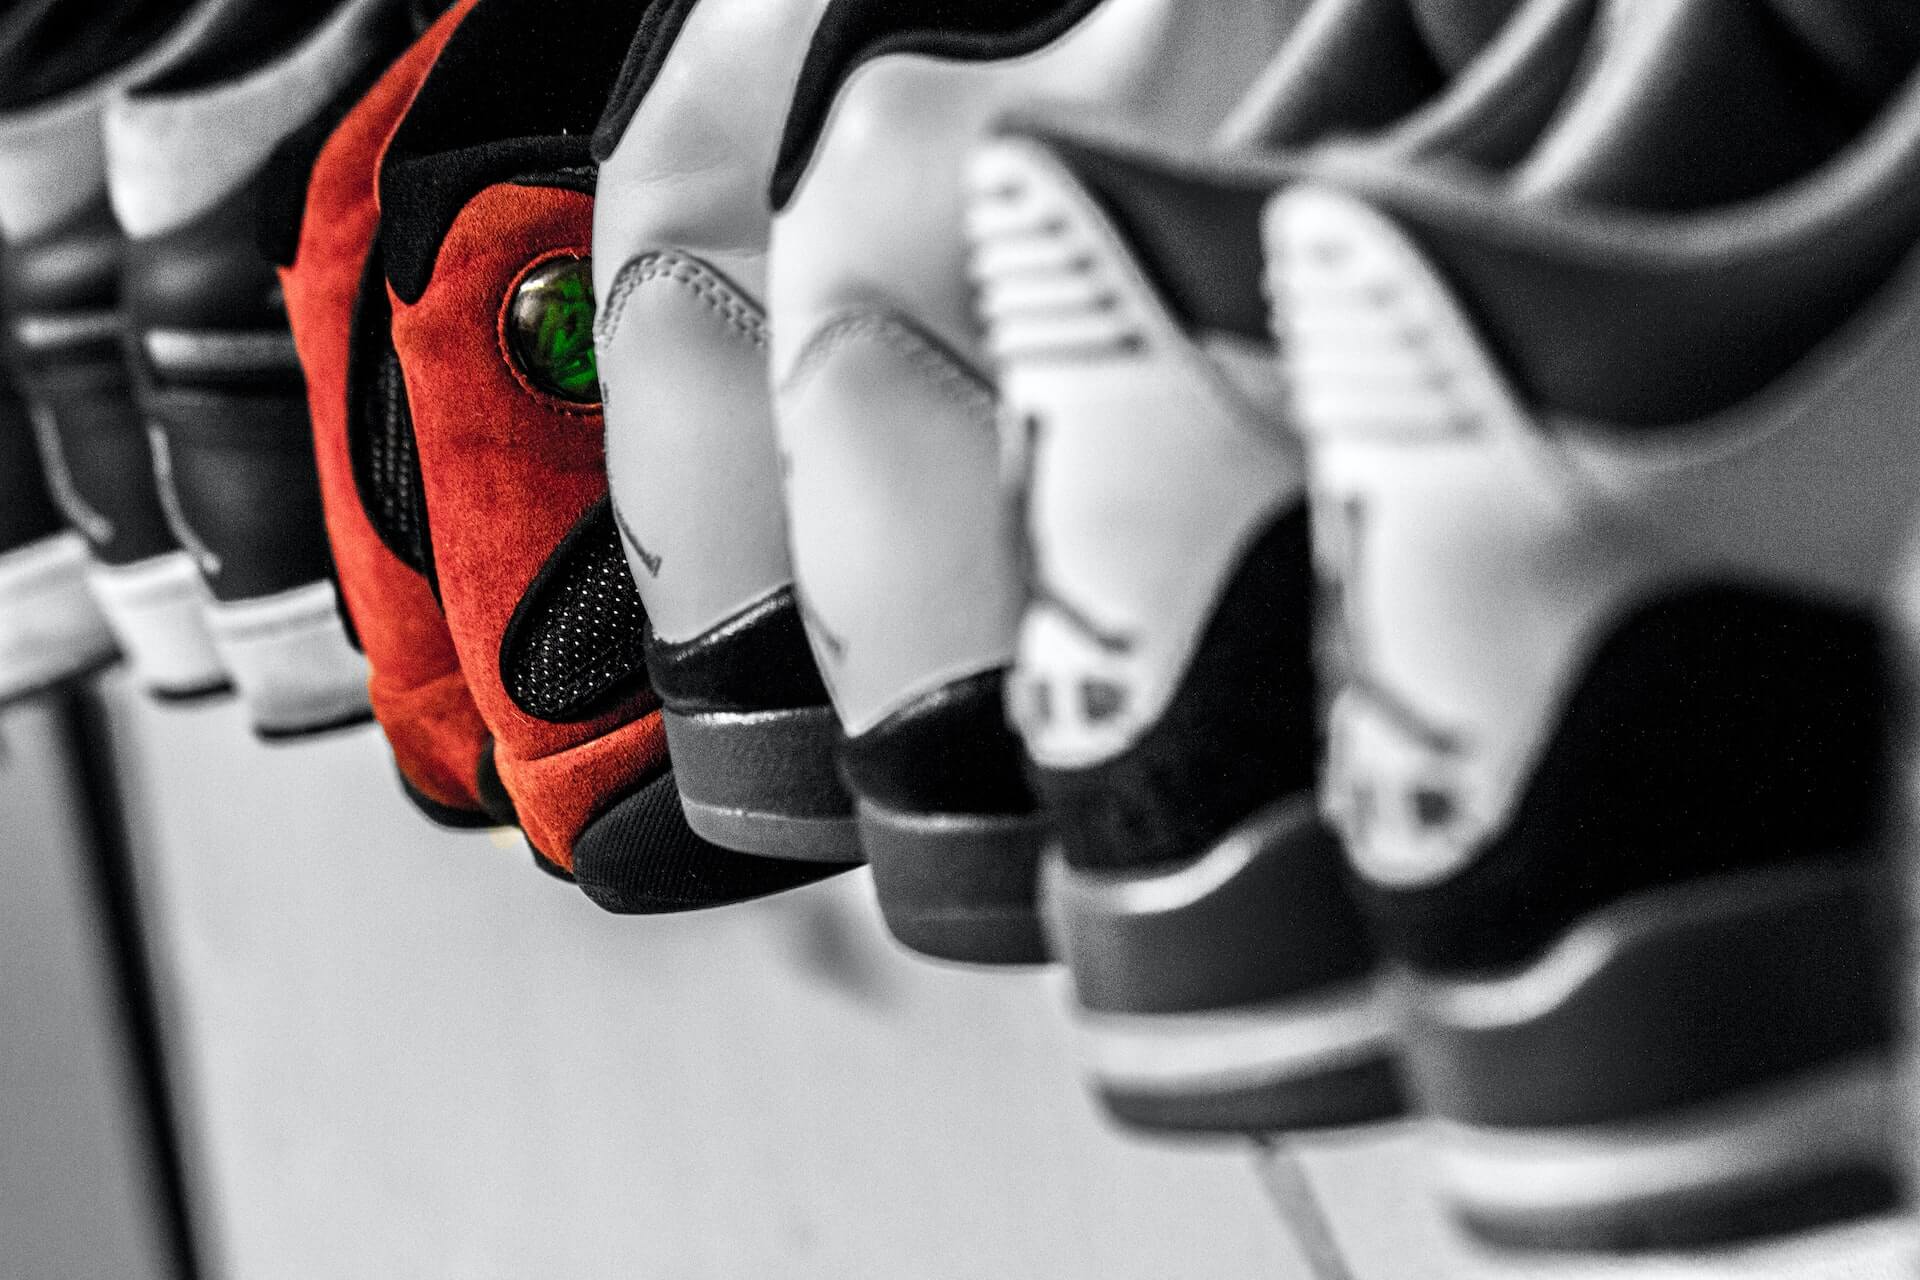 Sneakers on a rack